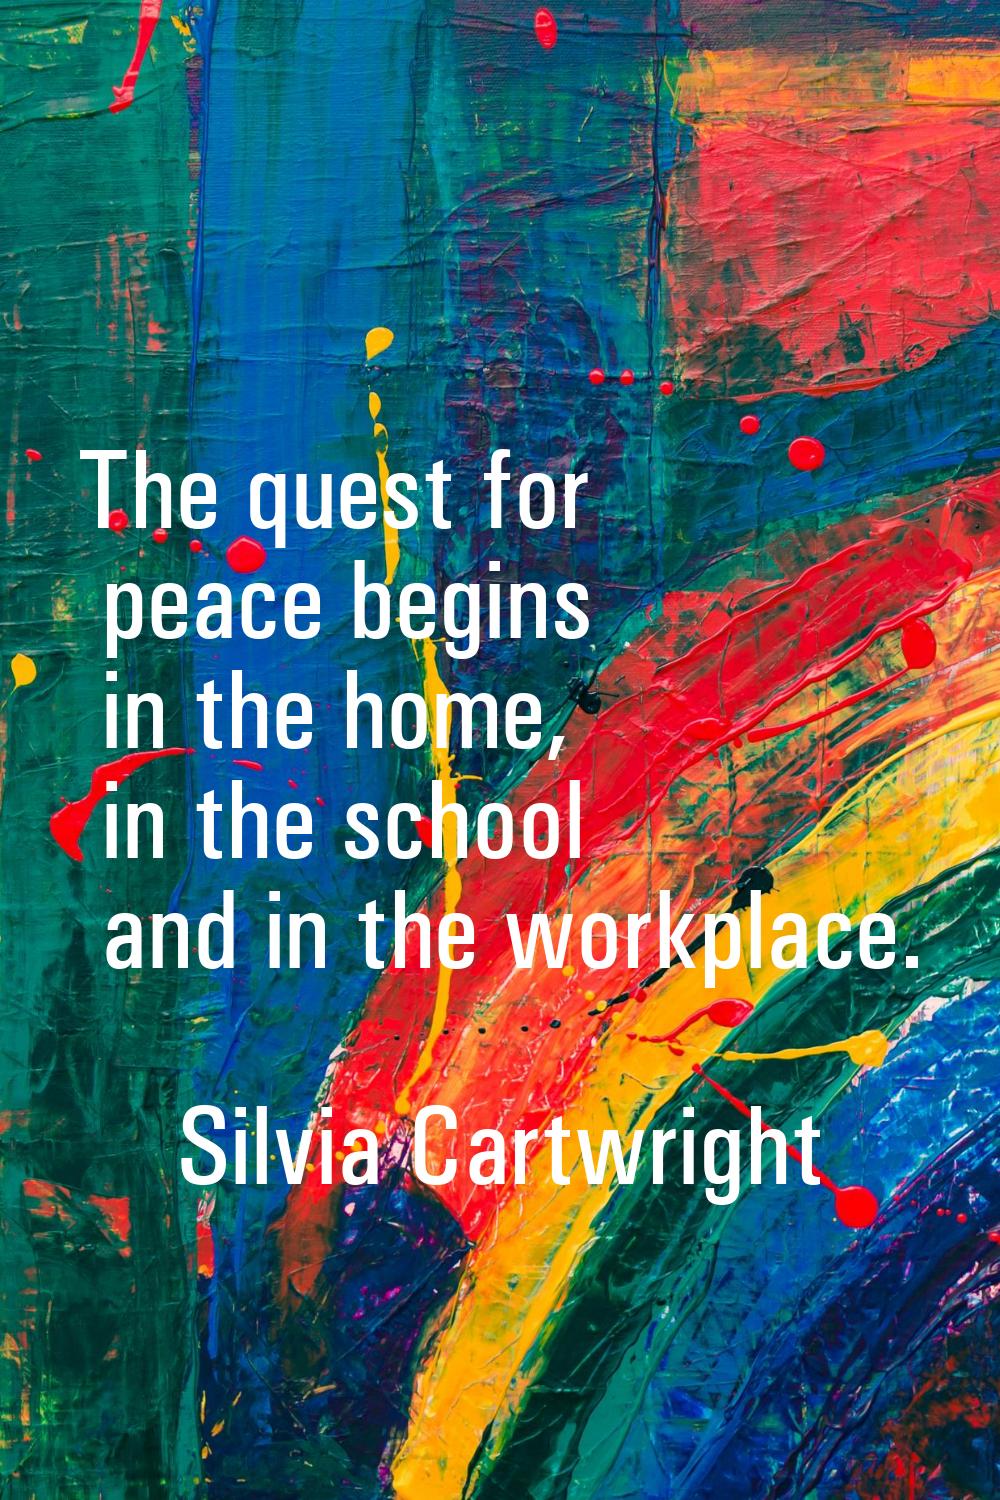 The quest for peace begins in the home, in the school and in the workplace.